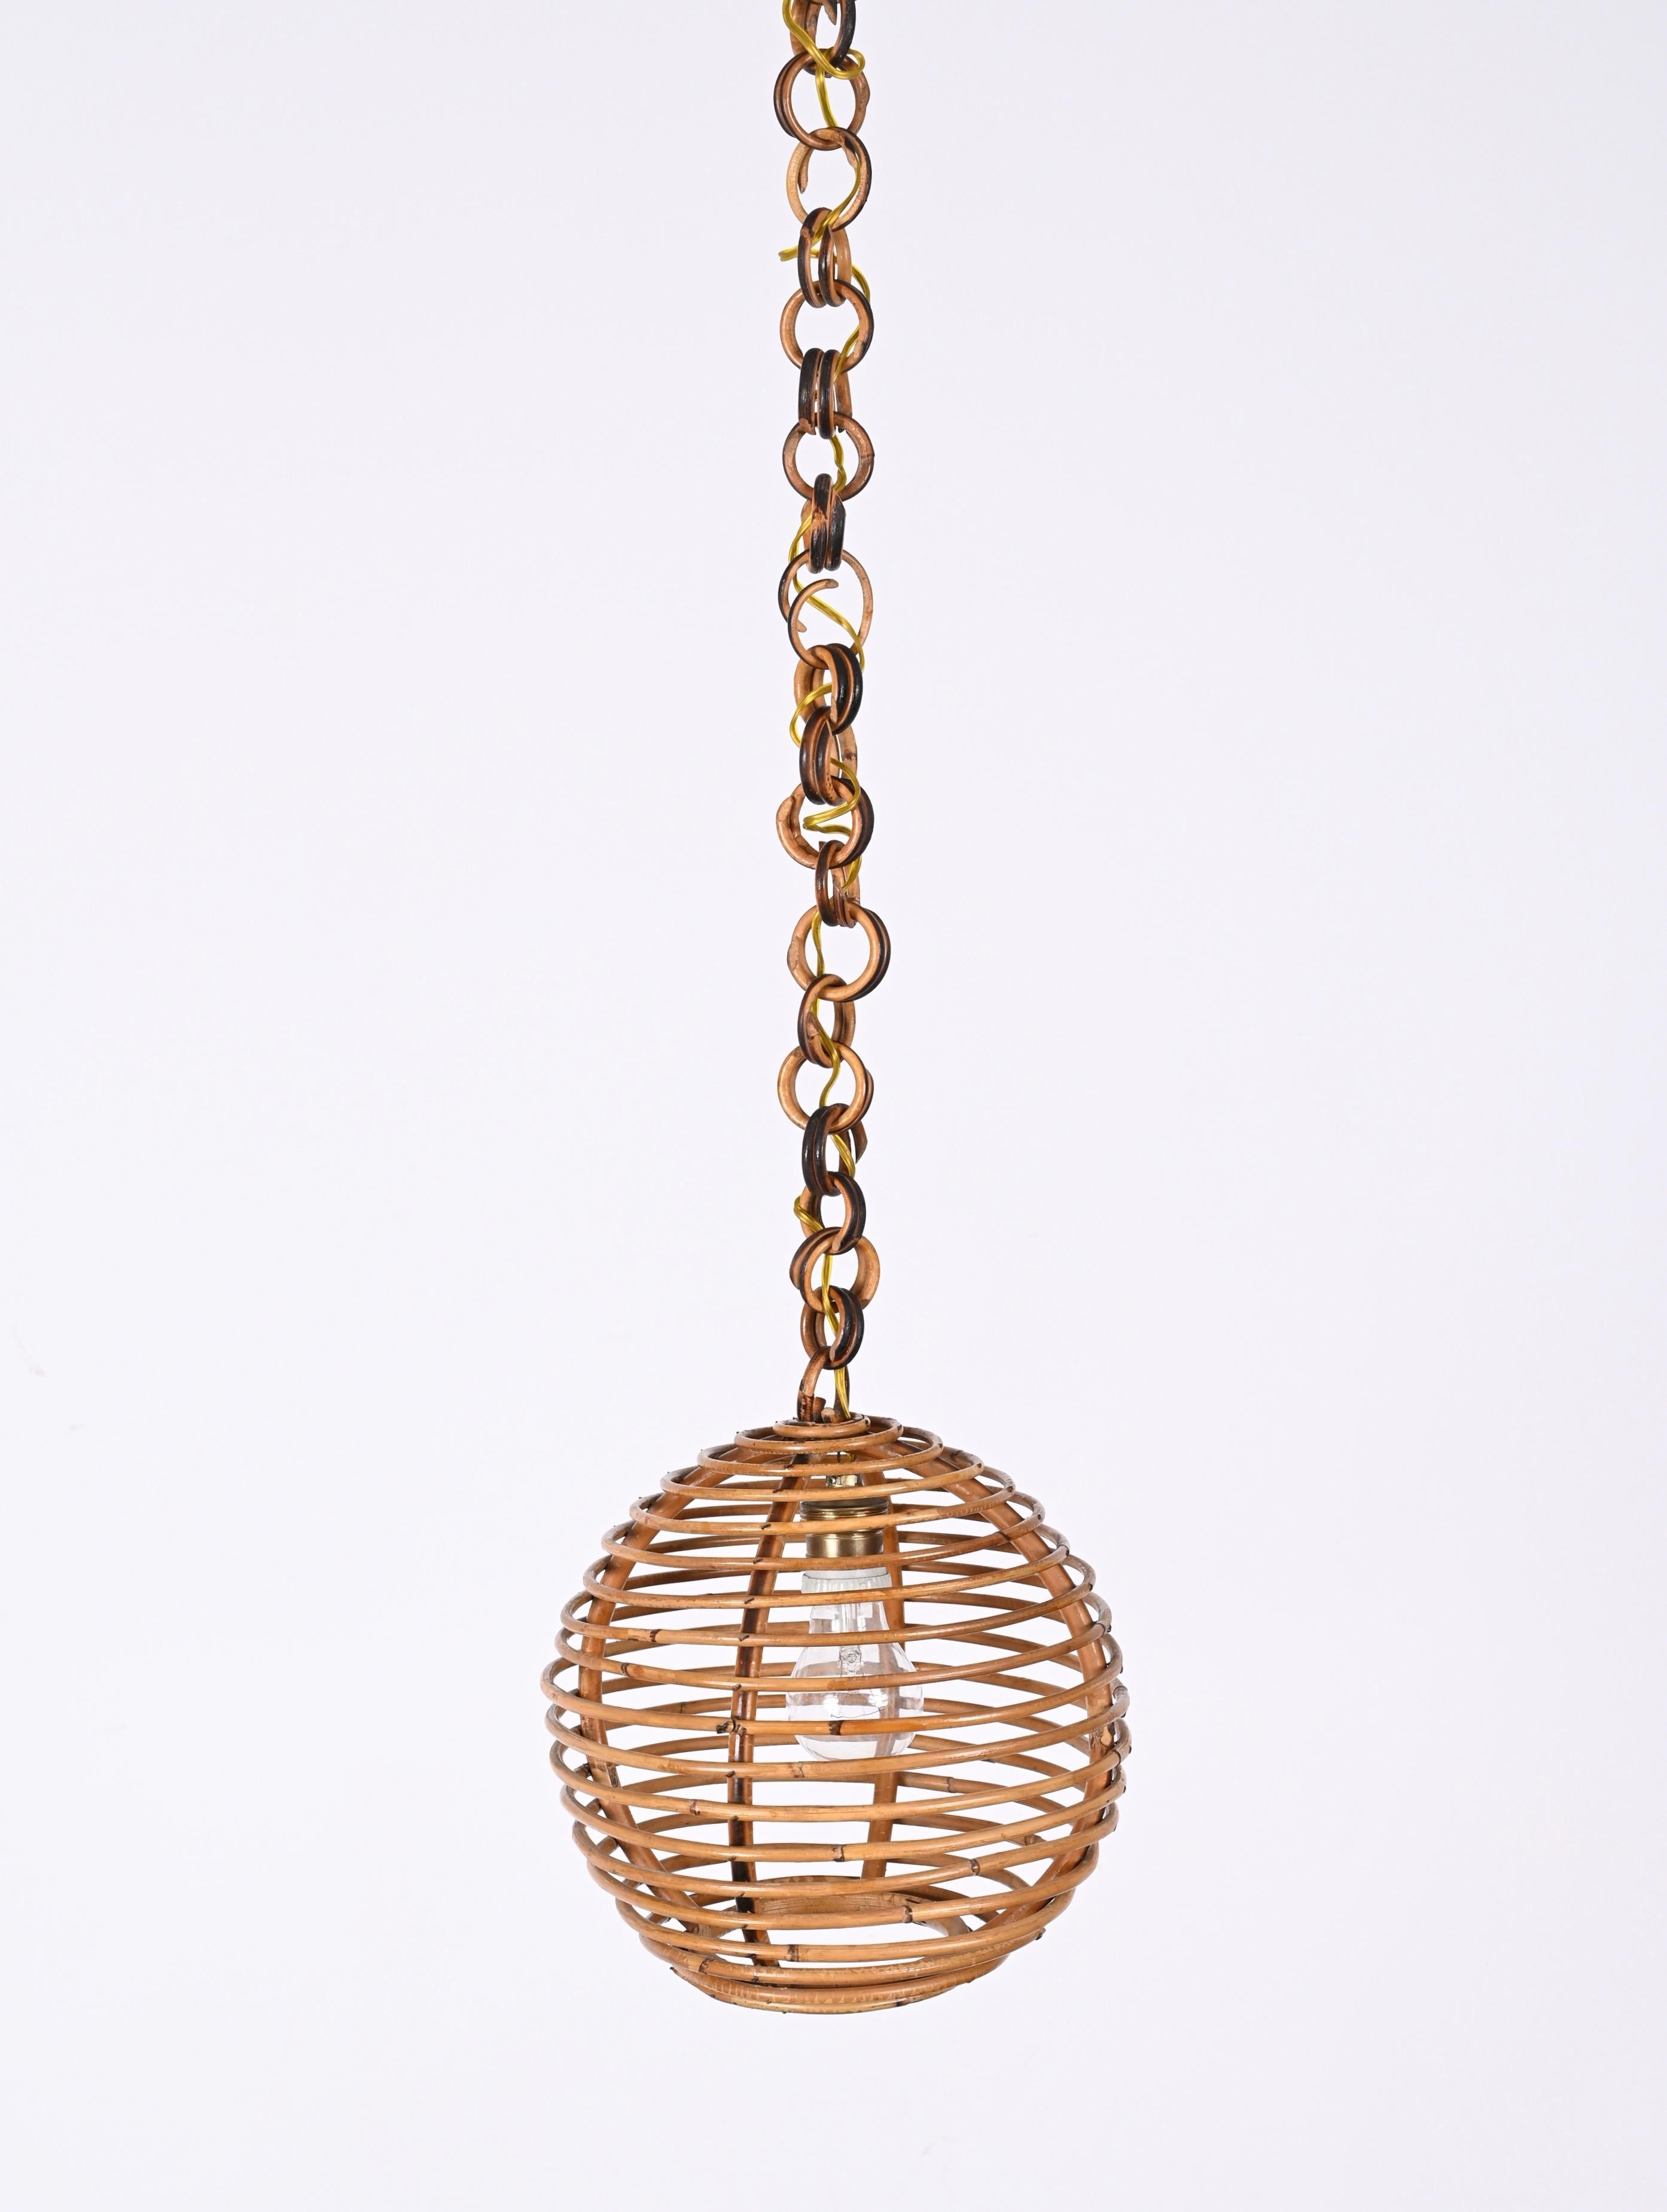 Stunning Midcentury bamboo and rattan spherical chandelier in Cote d'Azur style. This wonderful item was produced in Italy during the 1960s.

The fantastic design is perfect for those who love the use of rattan to create wonderful masterpieces. It